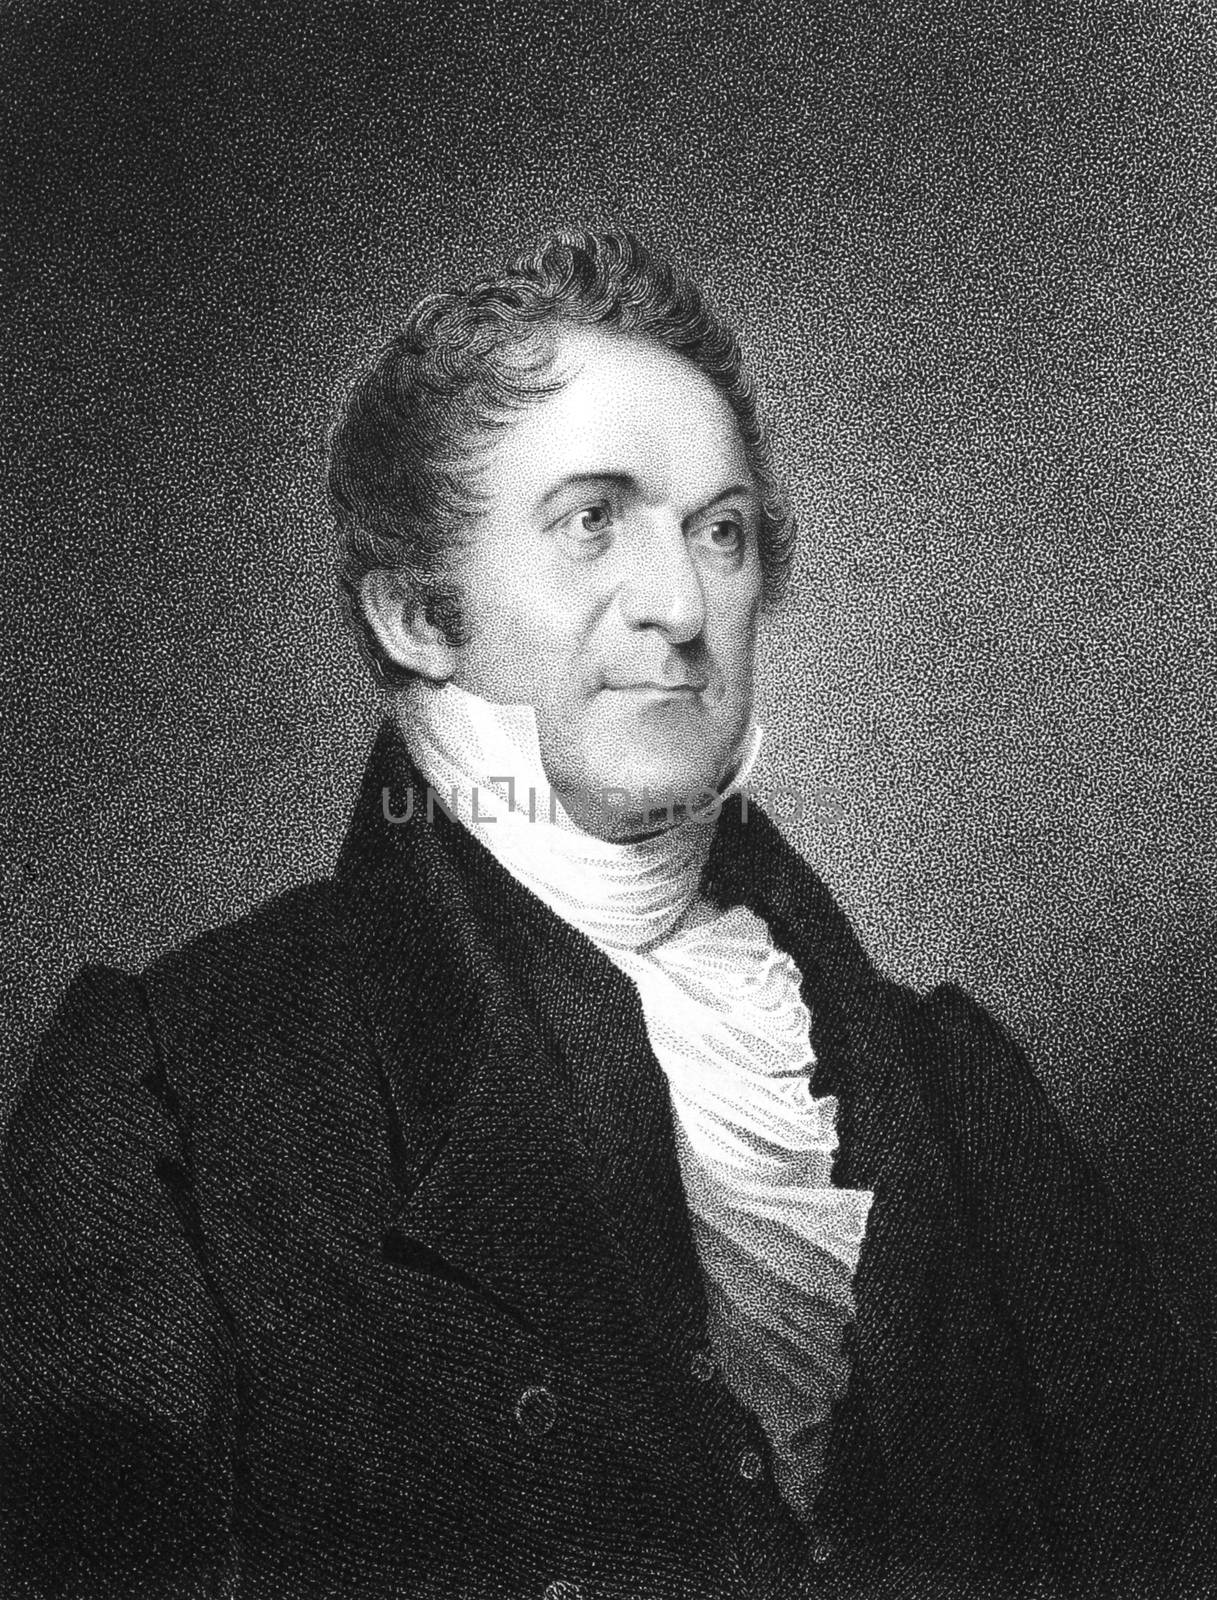 William Wirt (1772-1834) on engraving from 1834.  American author and statesman. Engraved by J.B Longacre and published in ''National Portrait Gallery of Distinguished Americans'',USA,1834.
